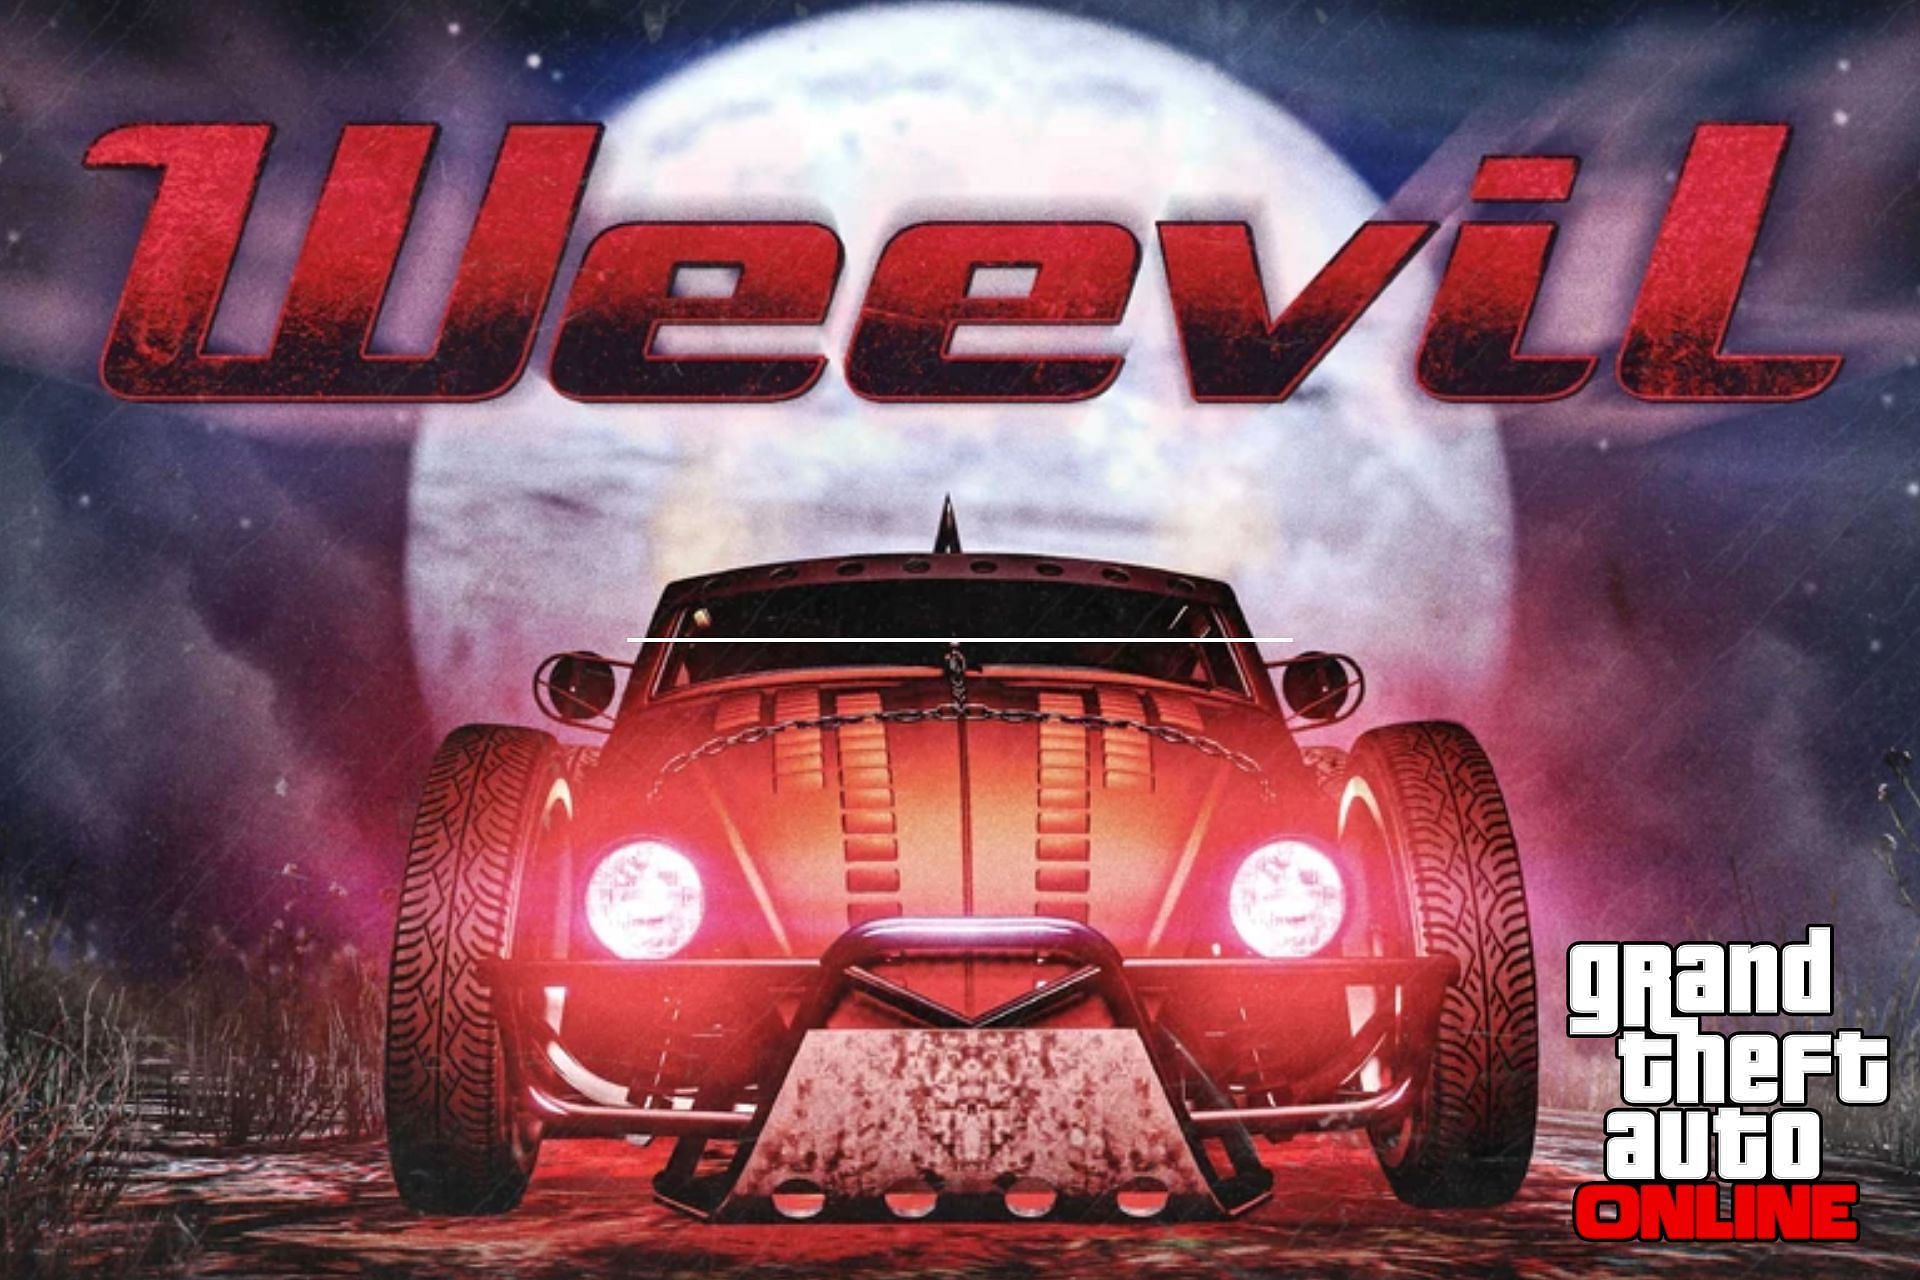 The Weevil Custom can easily outrun many vehicles in GTA Online (Image via Rockstar Games)